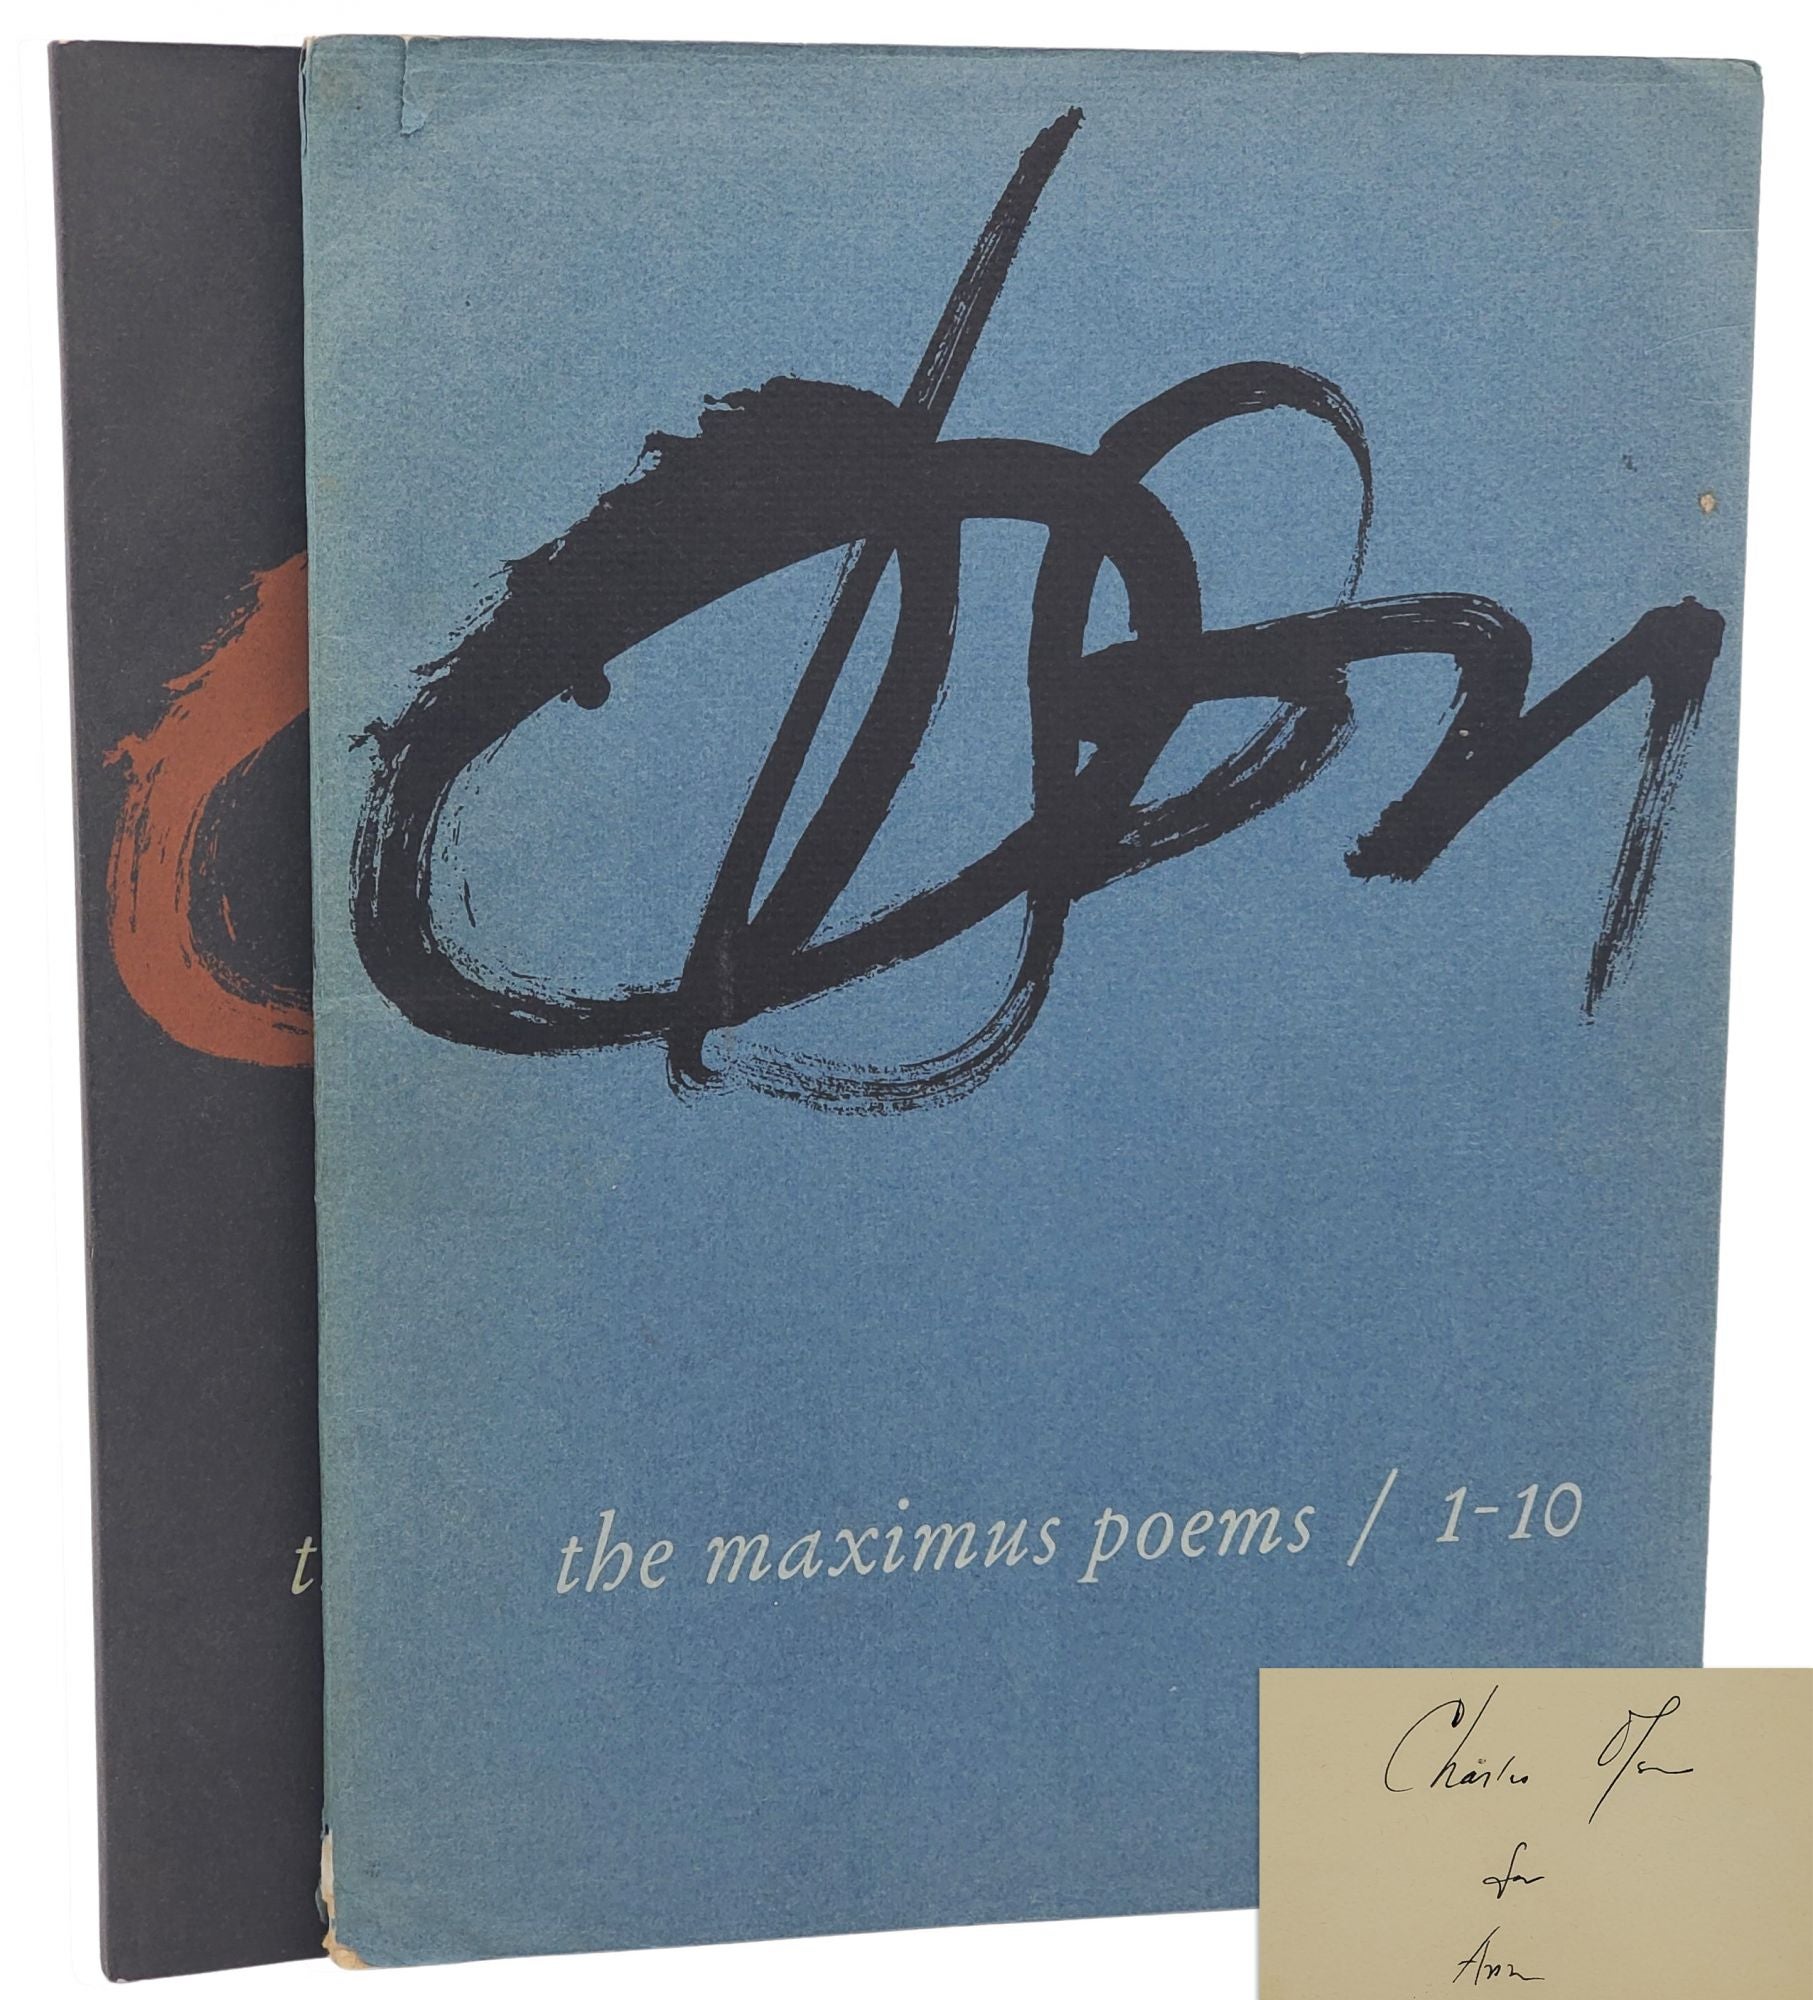 [Book #50625] THE MAXIMUS POEMS / 1-10 / 11-12 [VOL. 2 INSCRIBED]. Charles Olson.